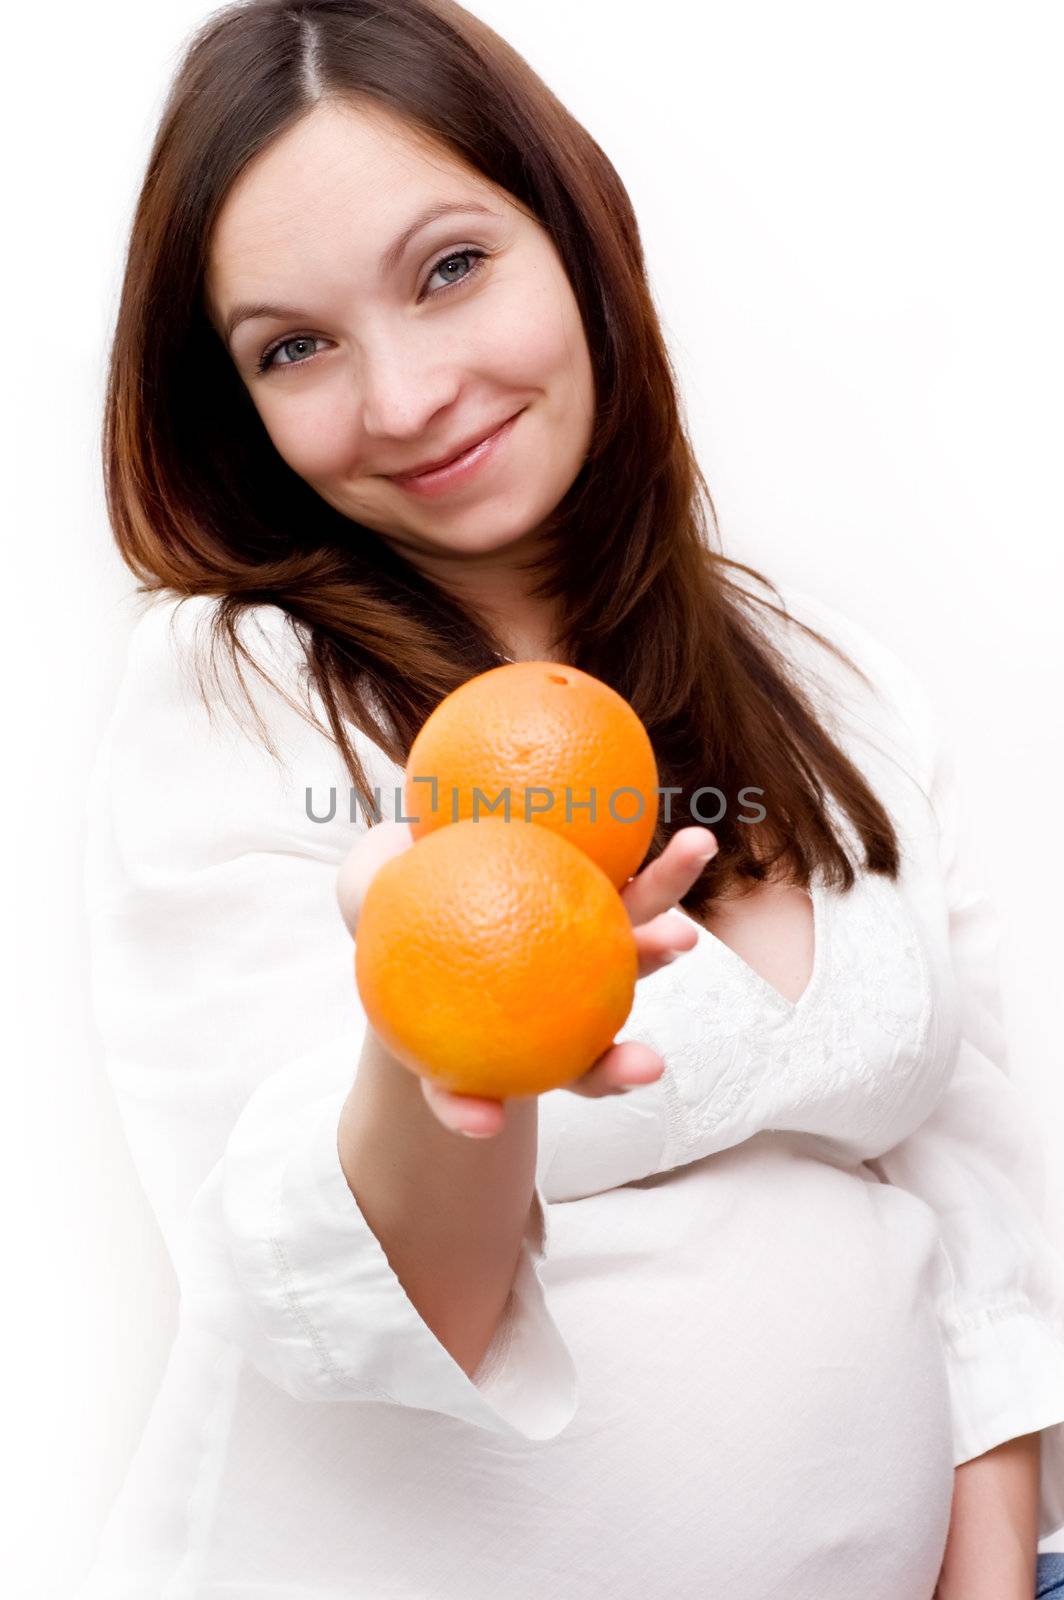 Pregnant woman holding oranges over white